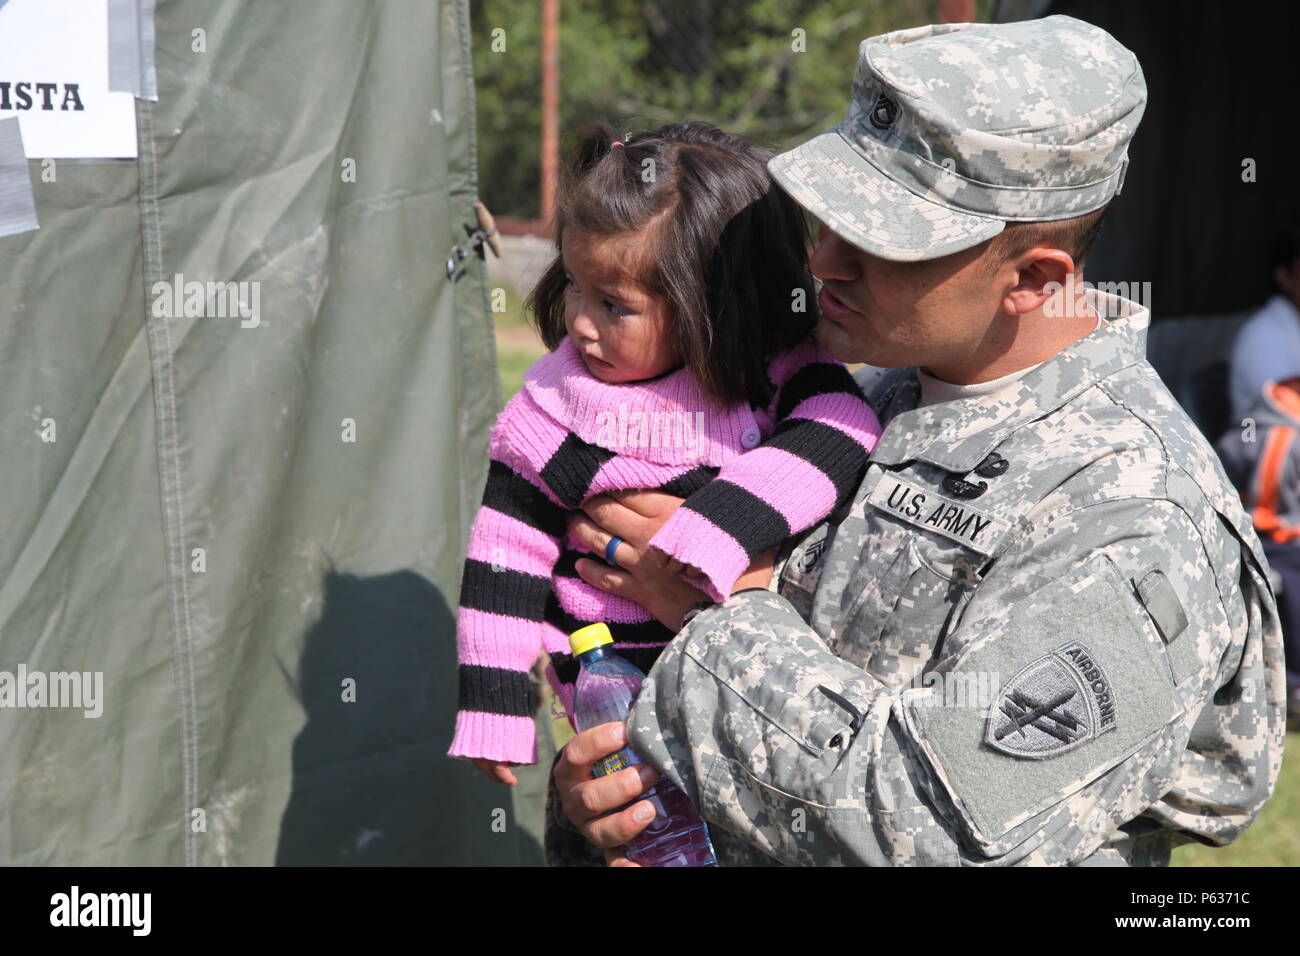 U.S. Army Ssg. Luis Pena takes time to comfort local Guatemalan child after receiving treatment as a part of humanitarian efforts of the Beyond the Horizon exercise at San Marcos, Guatemala, April 16, 2016. Task Force Red Wolf and Army South conducts Humanitarian civil Assistance Training to include tactical level construction projects and medical readiness Training Exercises providing medical access and building schools in Guatemala with the Guatemalan government and non government agencies from 05Mar16 to 18JUN16 in order to improve the mission readiness of US Forces and to provide a lasting Stock Photo